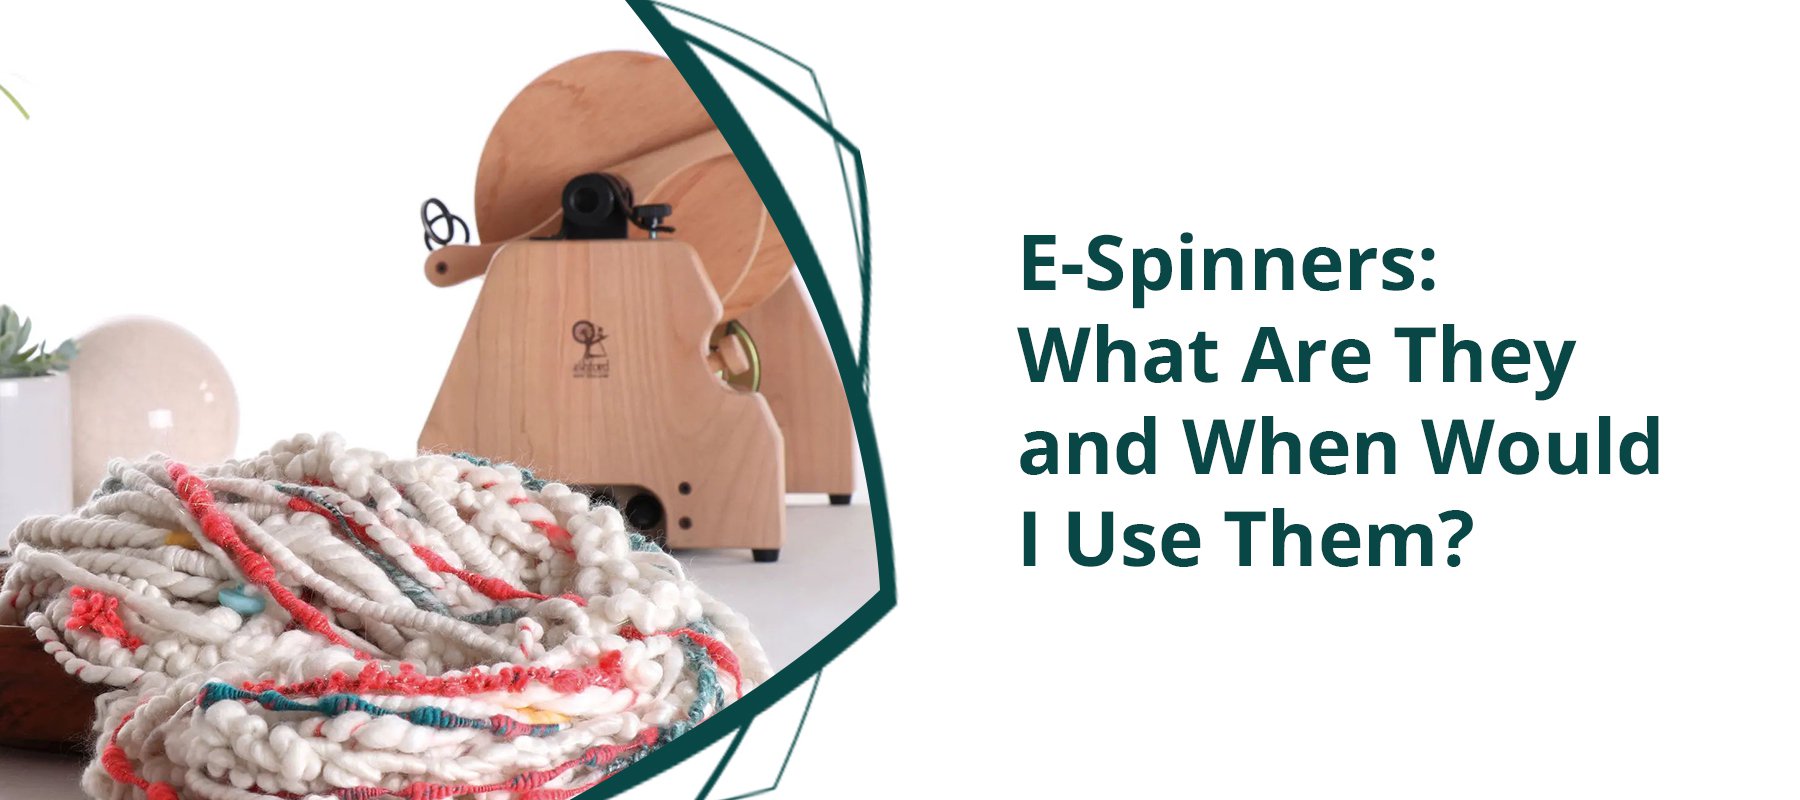 E-Spinners: What Are They and When Would I Use Them?